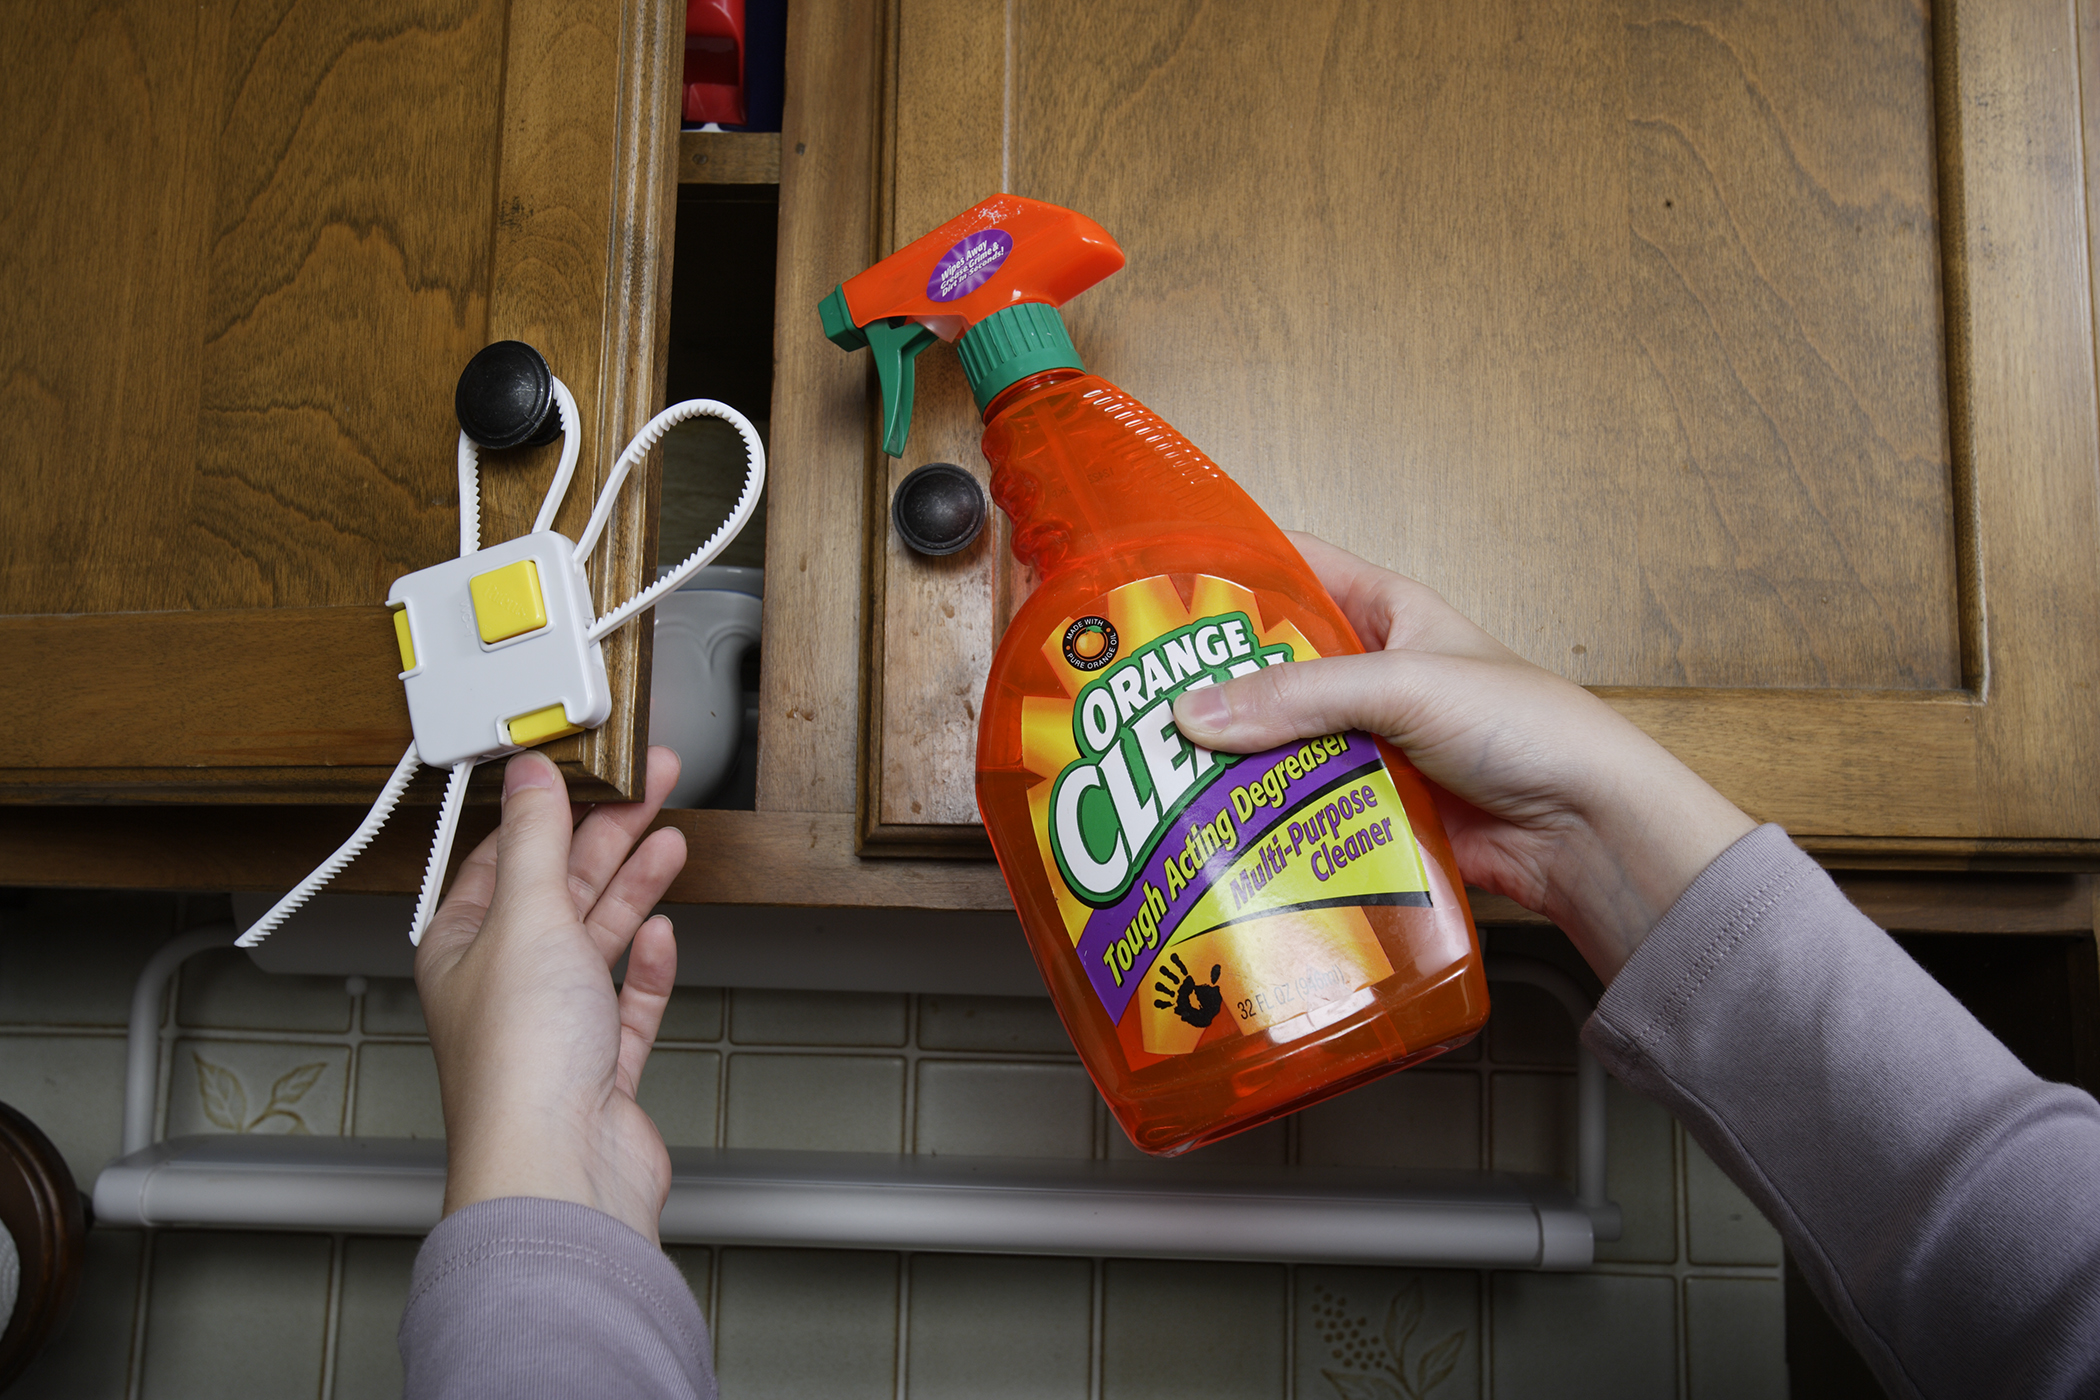 Safe storage of a household cleaning product is demonstrated as an orange spray bottle is placed in an upper cabinet with a cabinet lock to prevent poisonings